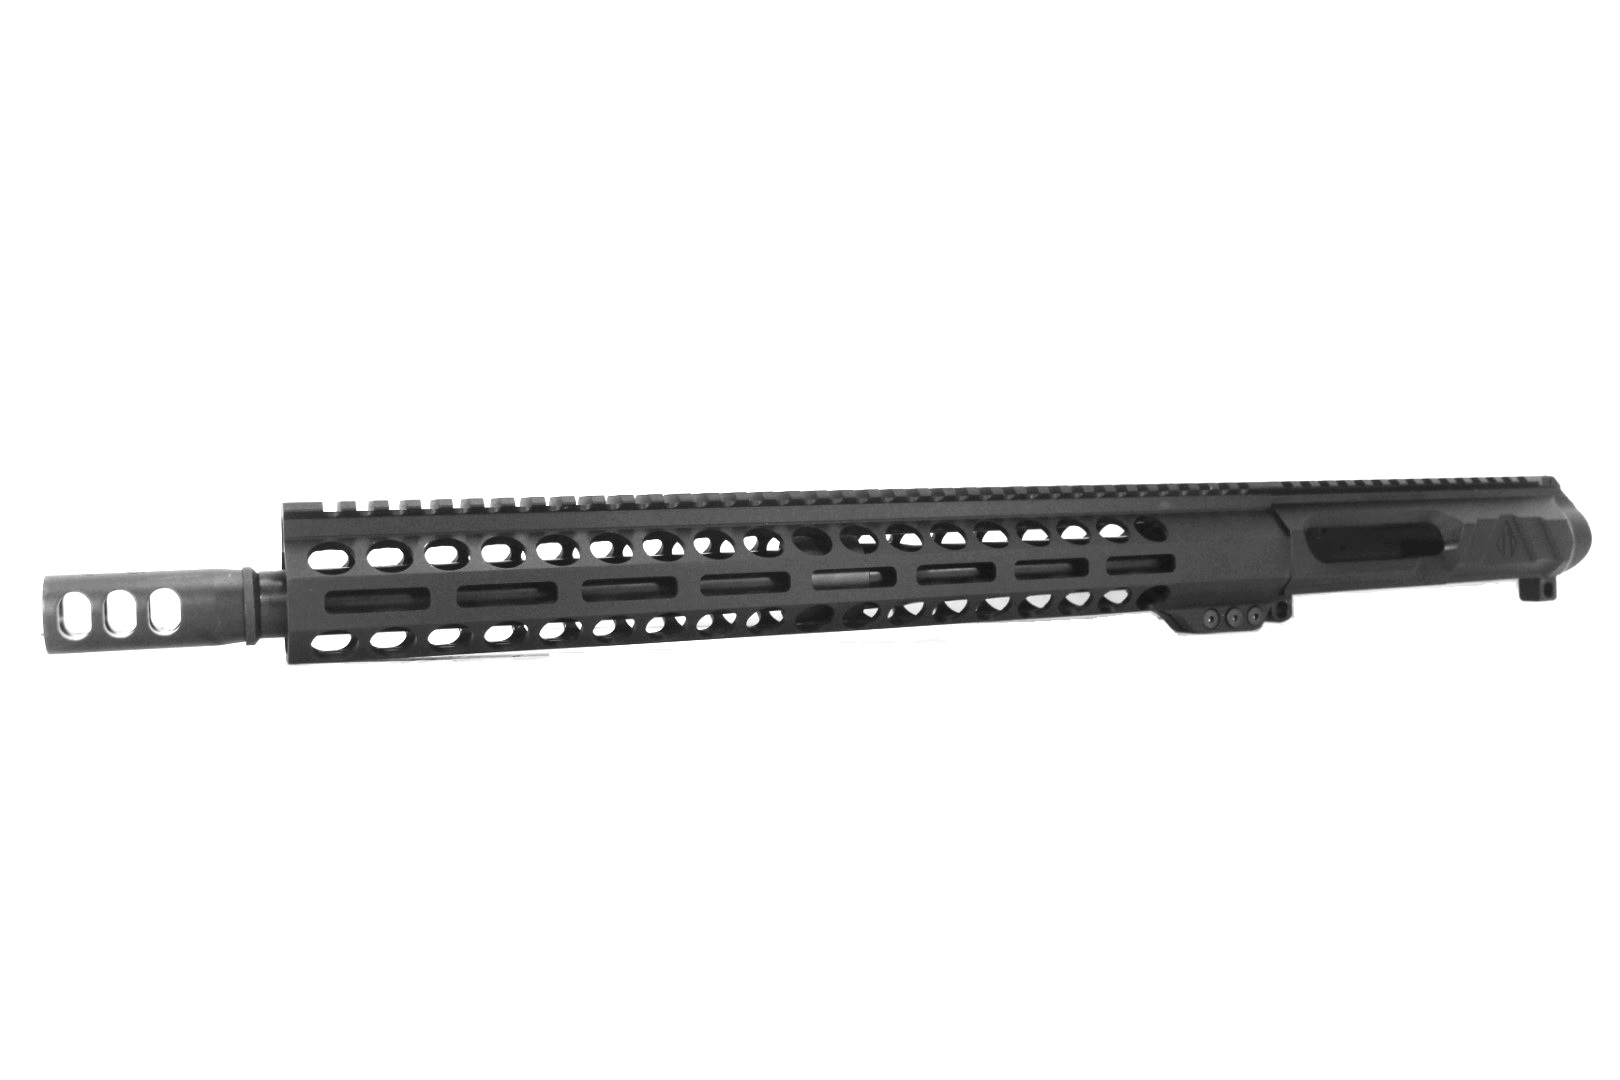 16 inch LEFT HAND 50 Beowulf Complete AR-15 Upper